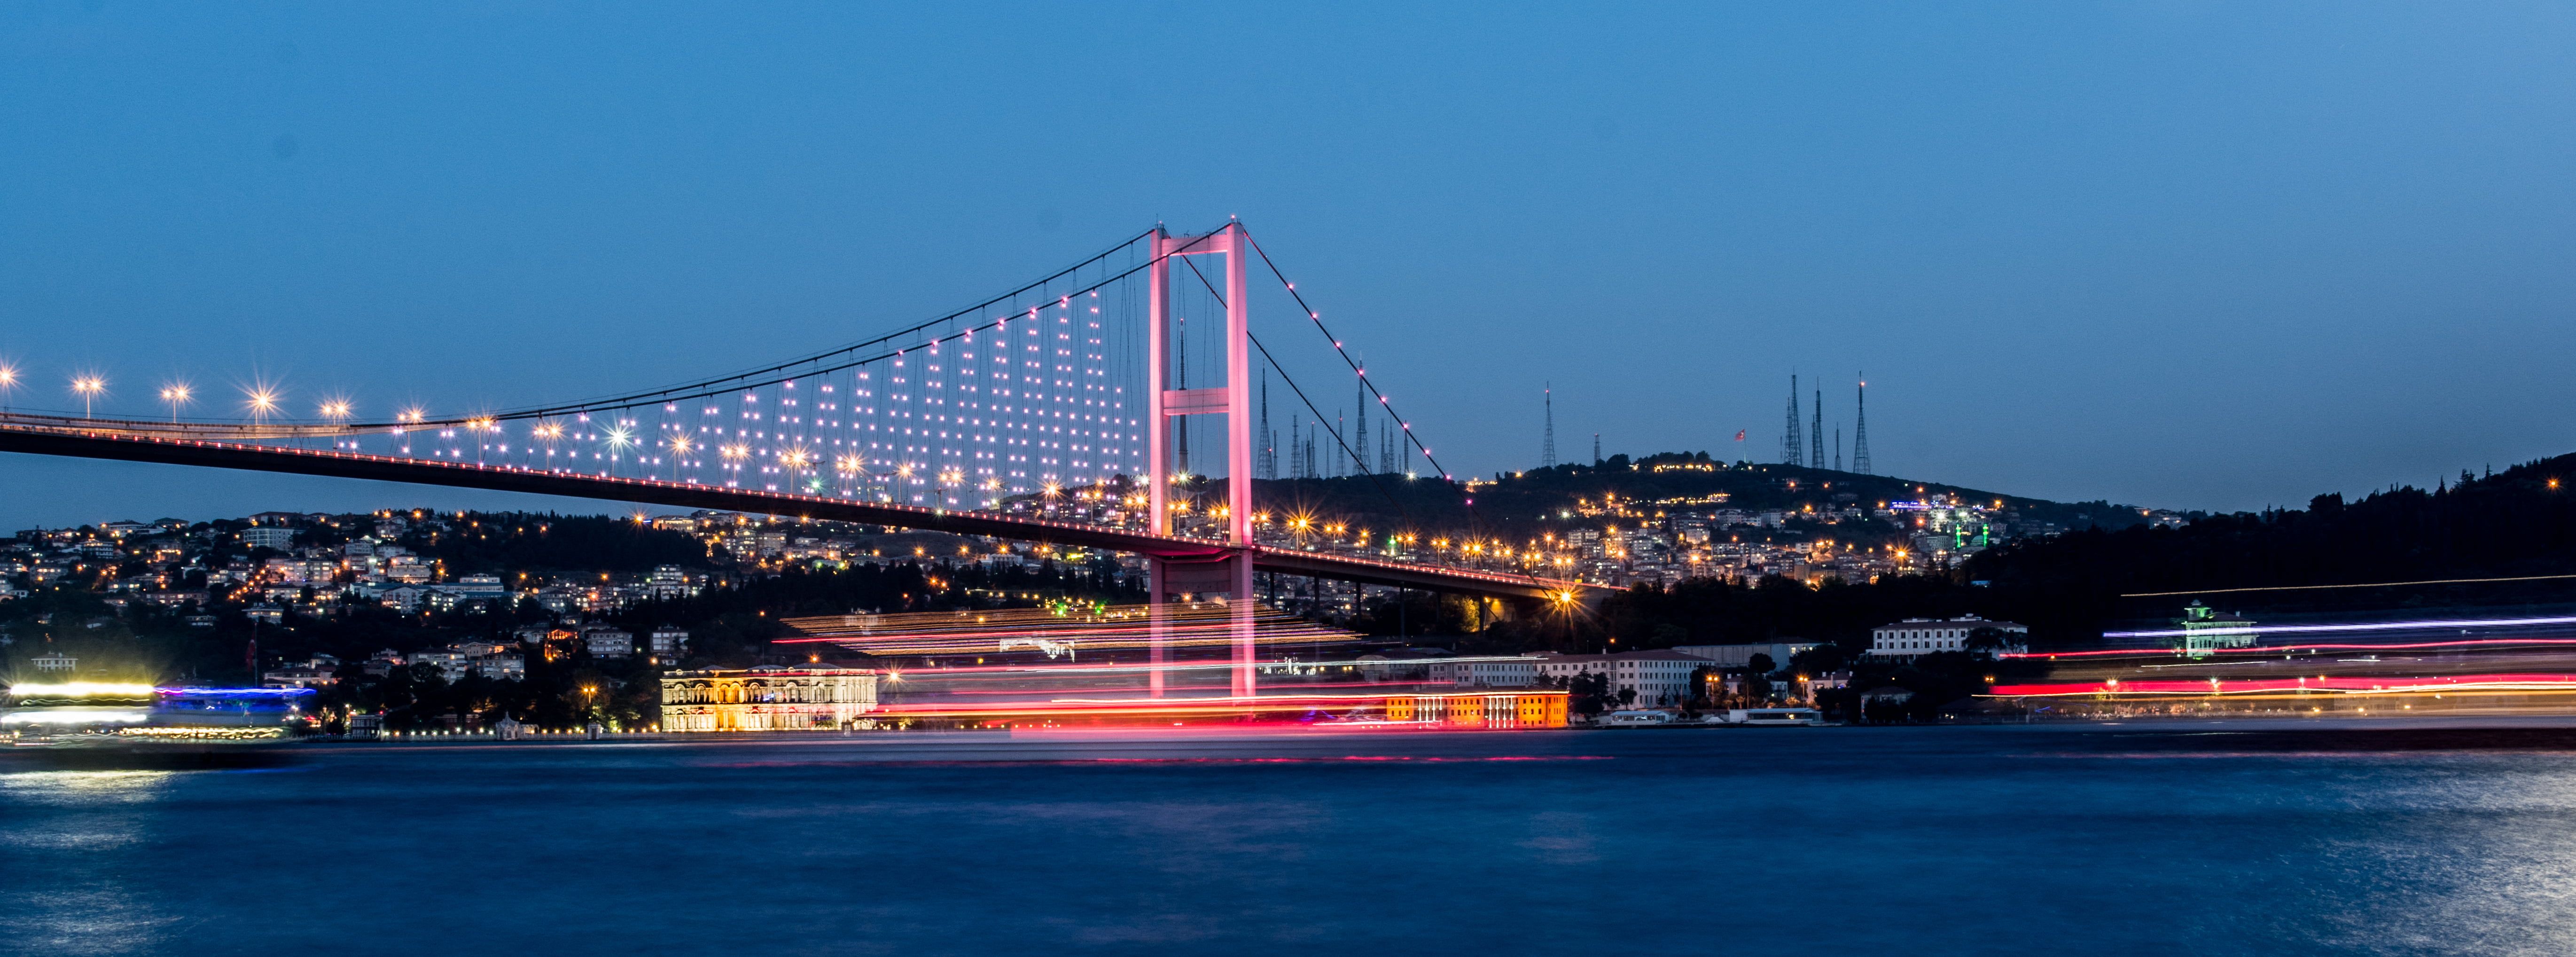 Body of water with pink and black bridge photo, istanbul HD